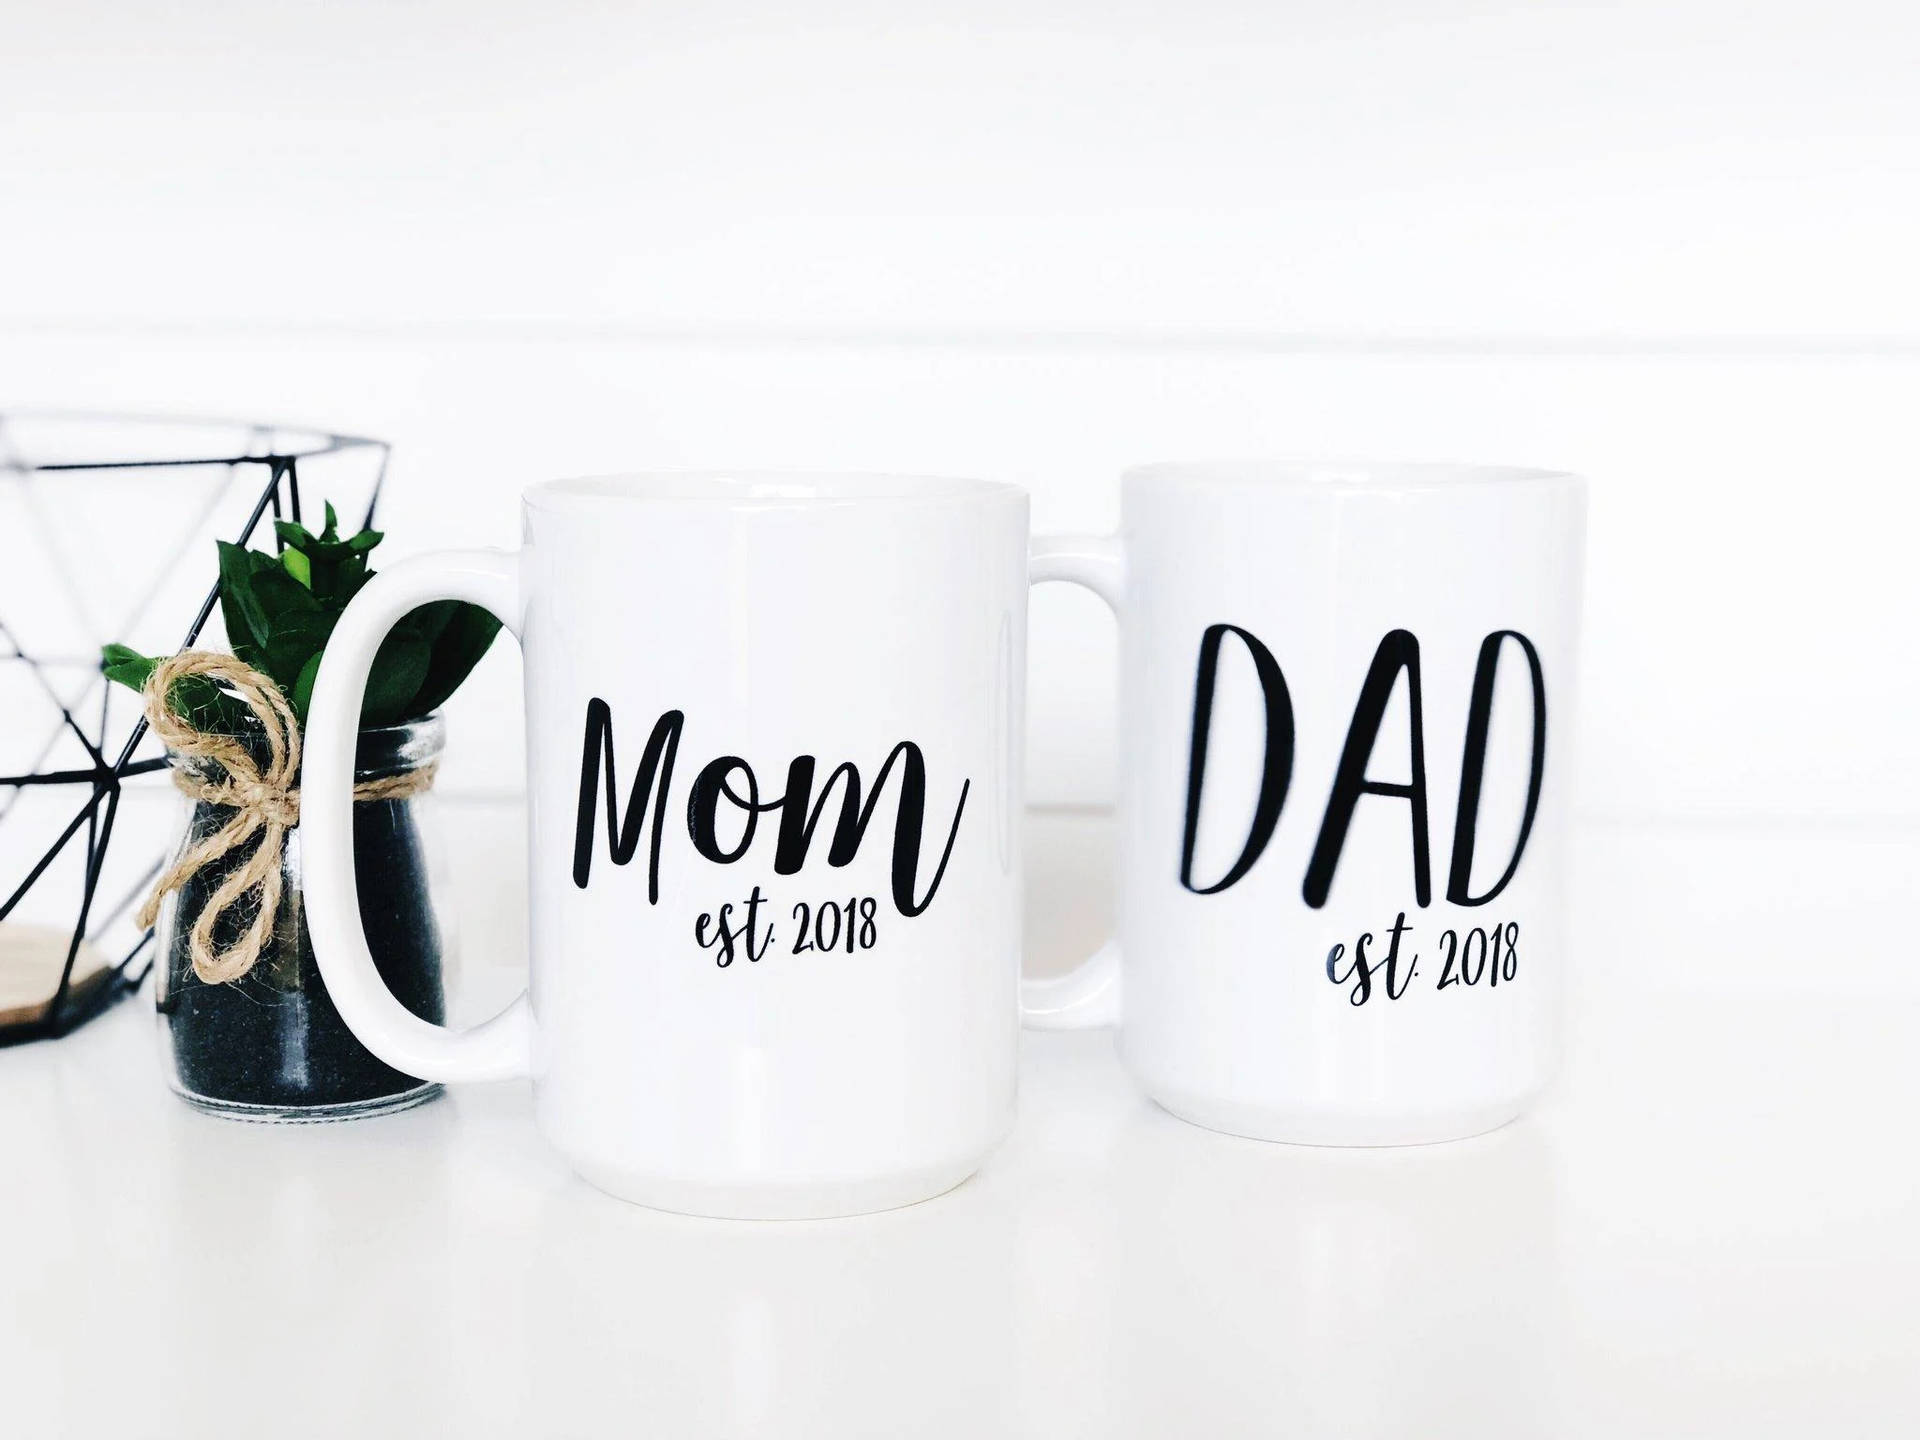 aaron fernau recommends daddy mugs tumblr pic